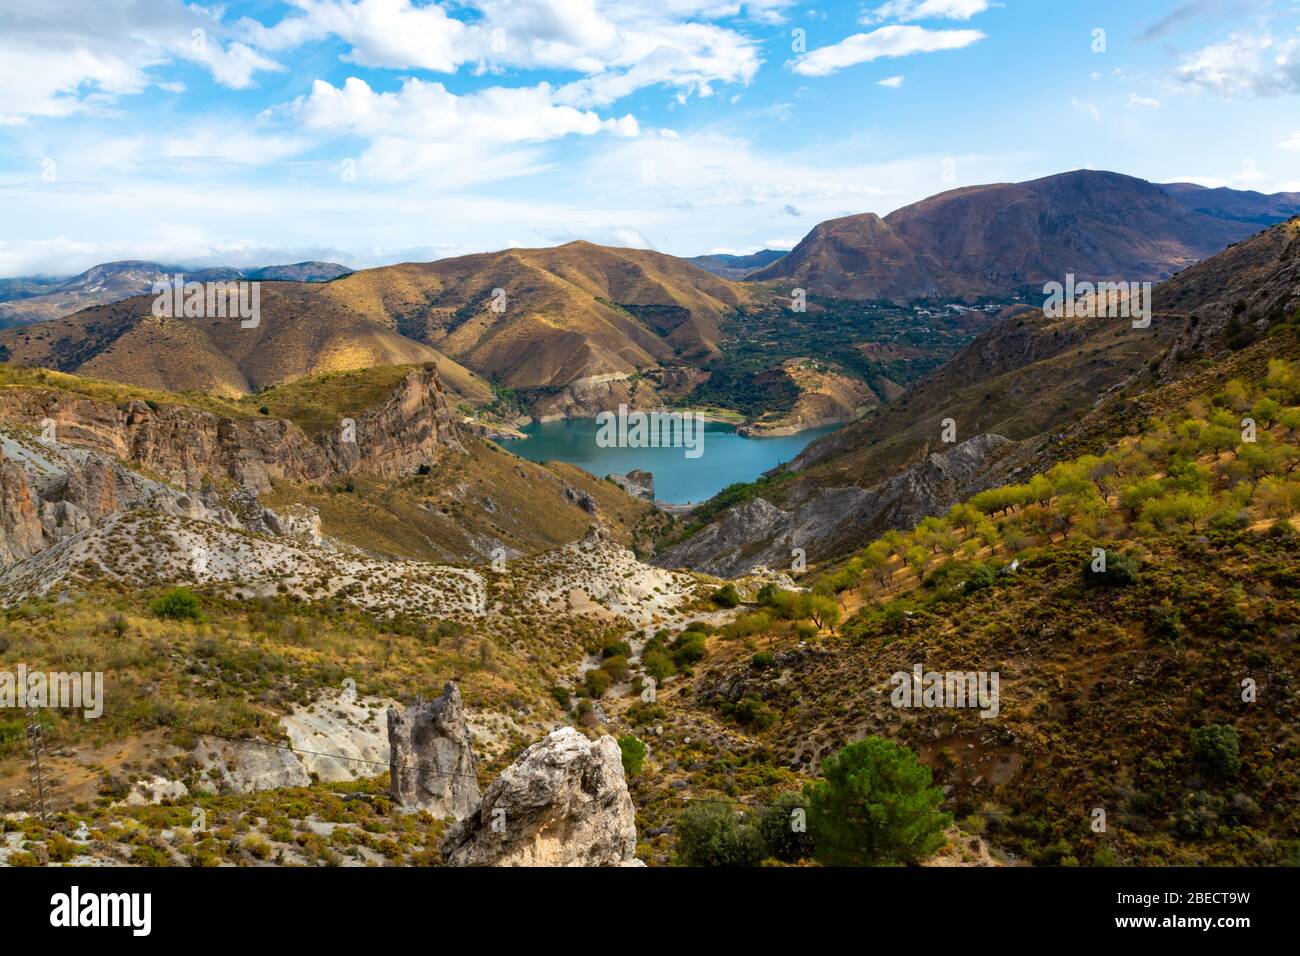 Landscapes of National park Sierra Nevada mountains near Malaga and  Granada, Andalusia, Spain in summer Stock Photo - Alamy